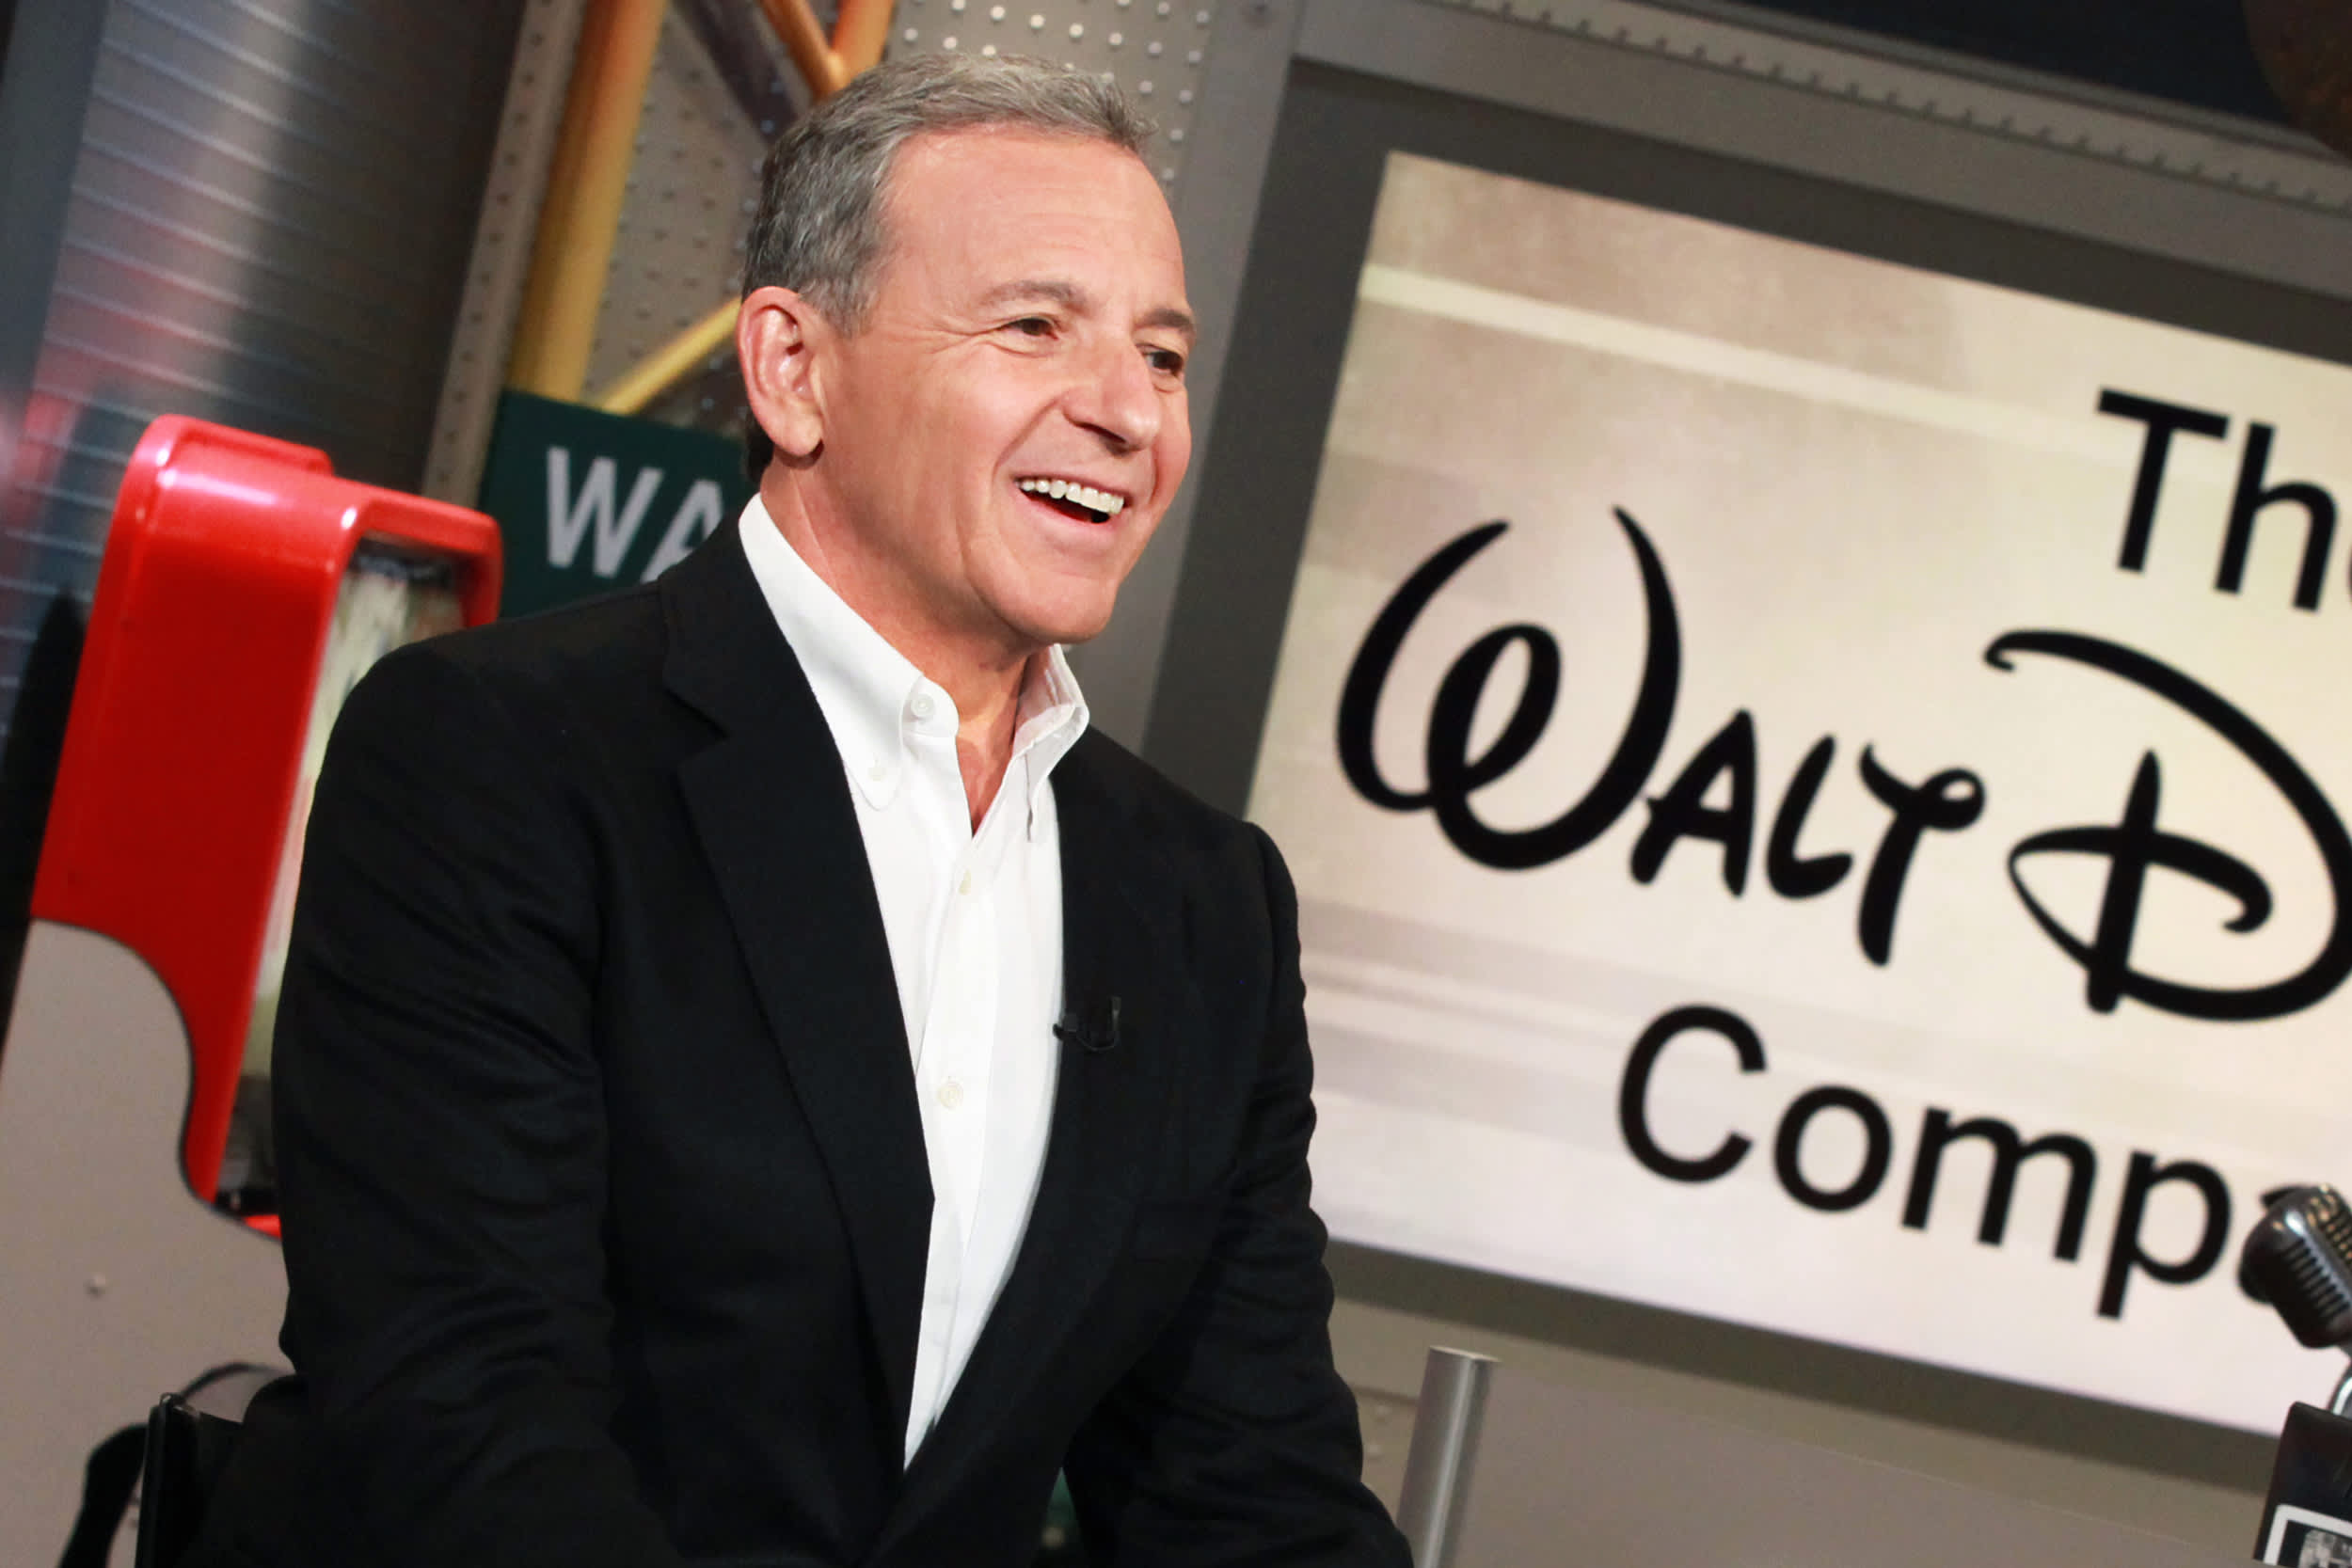 Disney CEO Bob Iger wasted no time laying out turnaround plans after a solid quarter